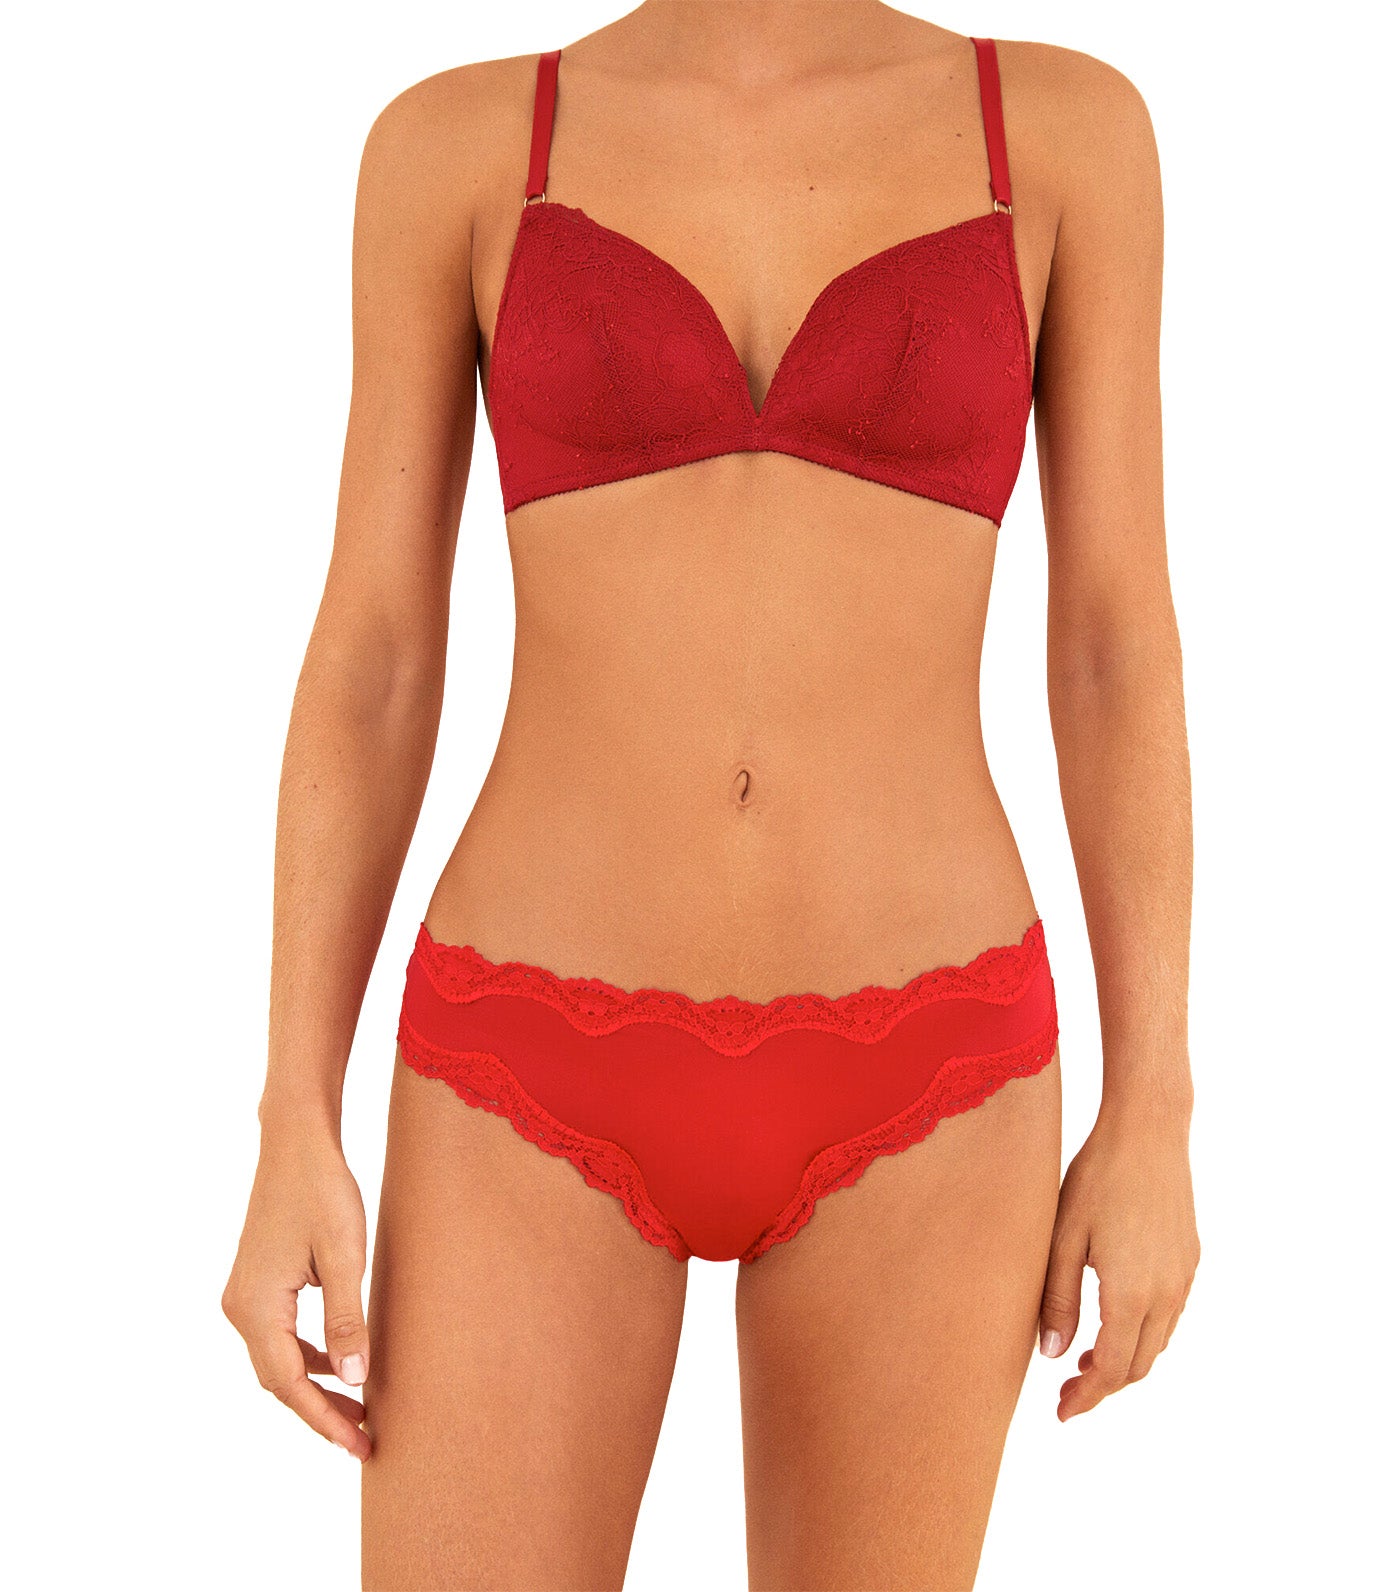 Microfiber and Lace Brazilian Panty Red